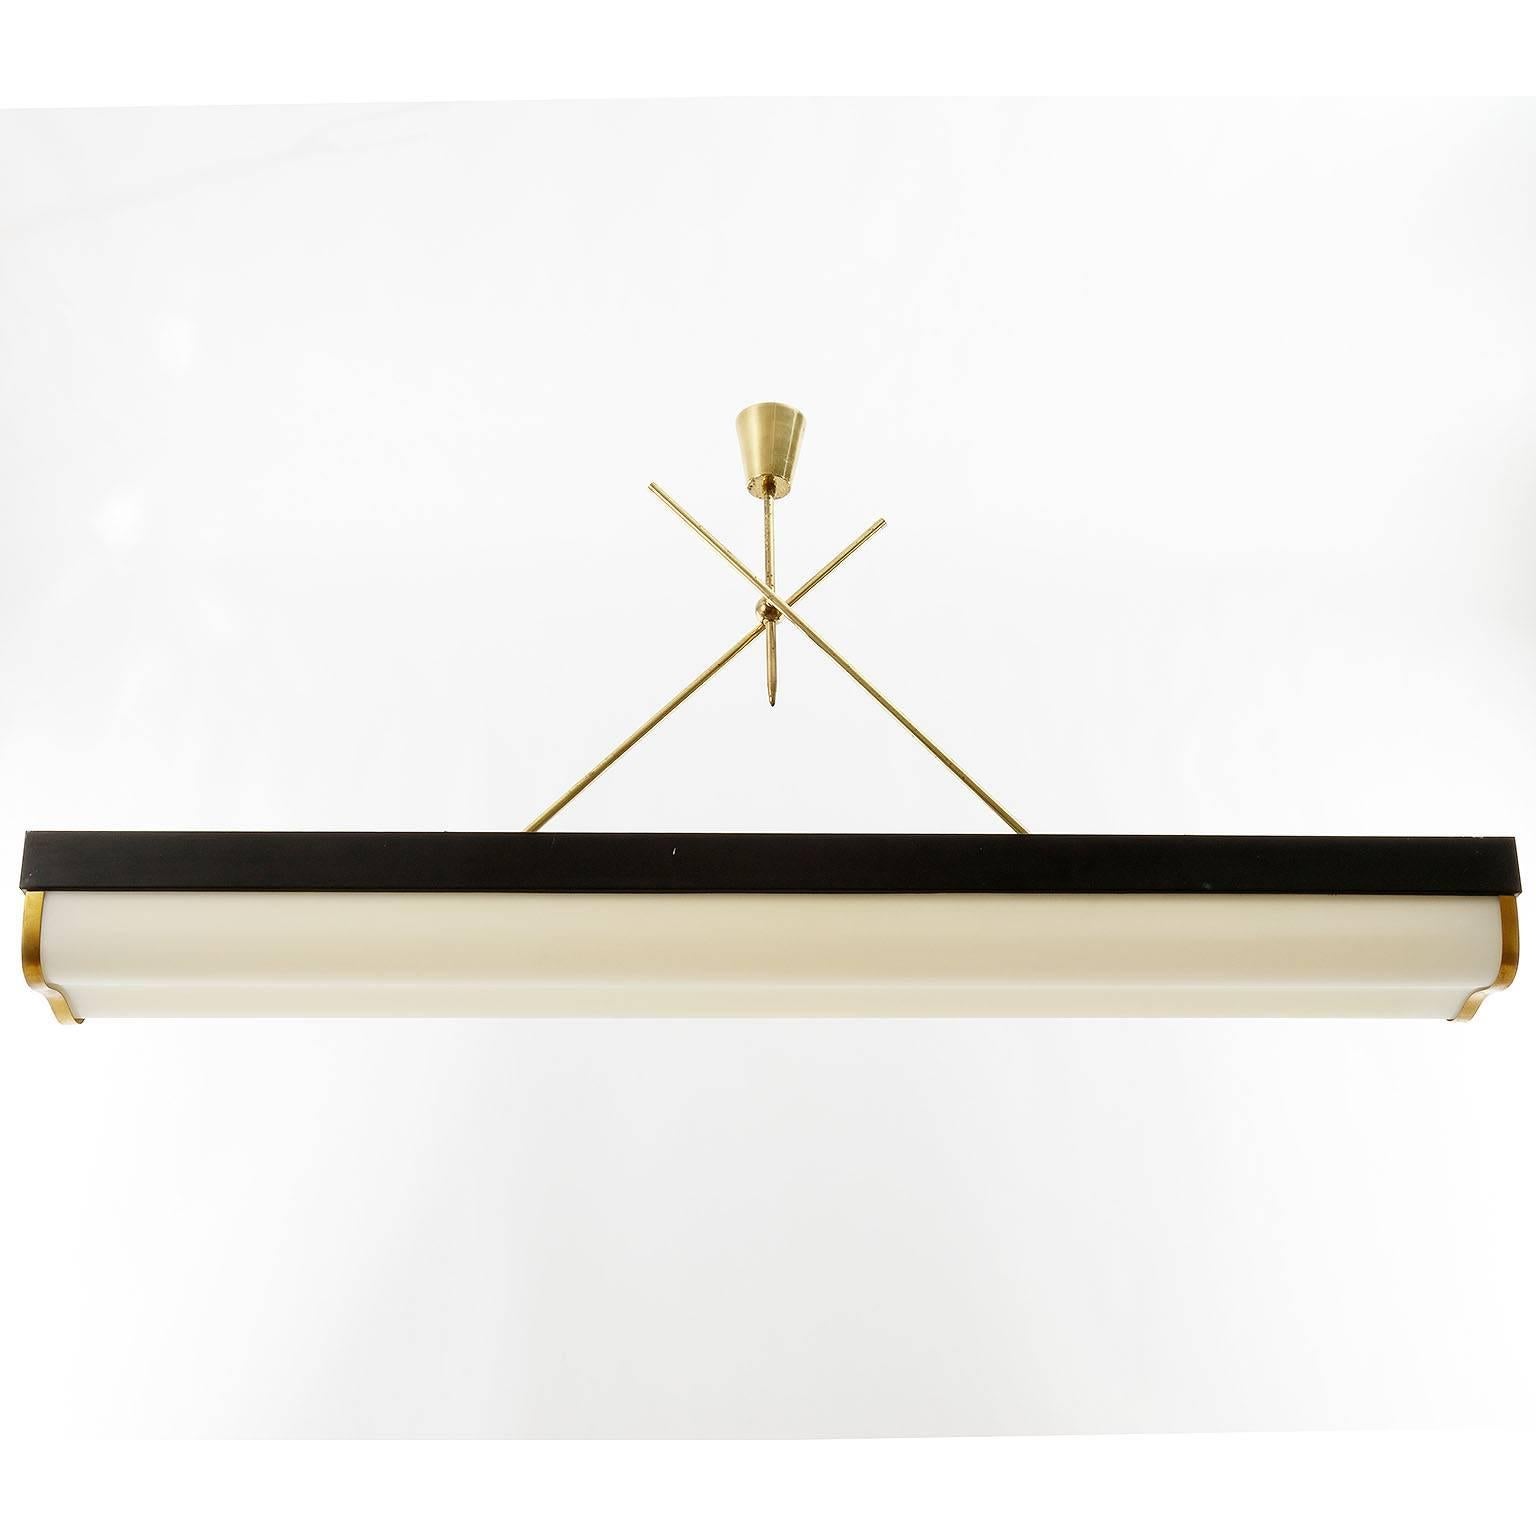 Impressive Italian light fixture by Stilnovo manufactured in the 1960s. A black lacquered and elongated metal frame holds two neon lamps which are covered by a curved lamp shade made of Lucite. The stem, canopy and details are made of brass with